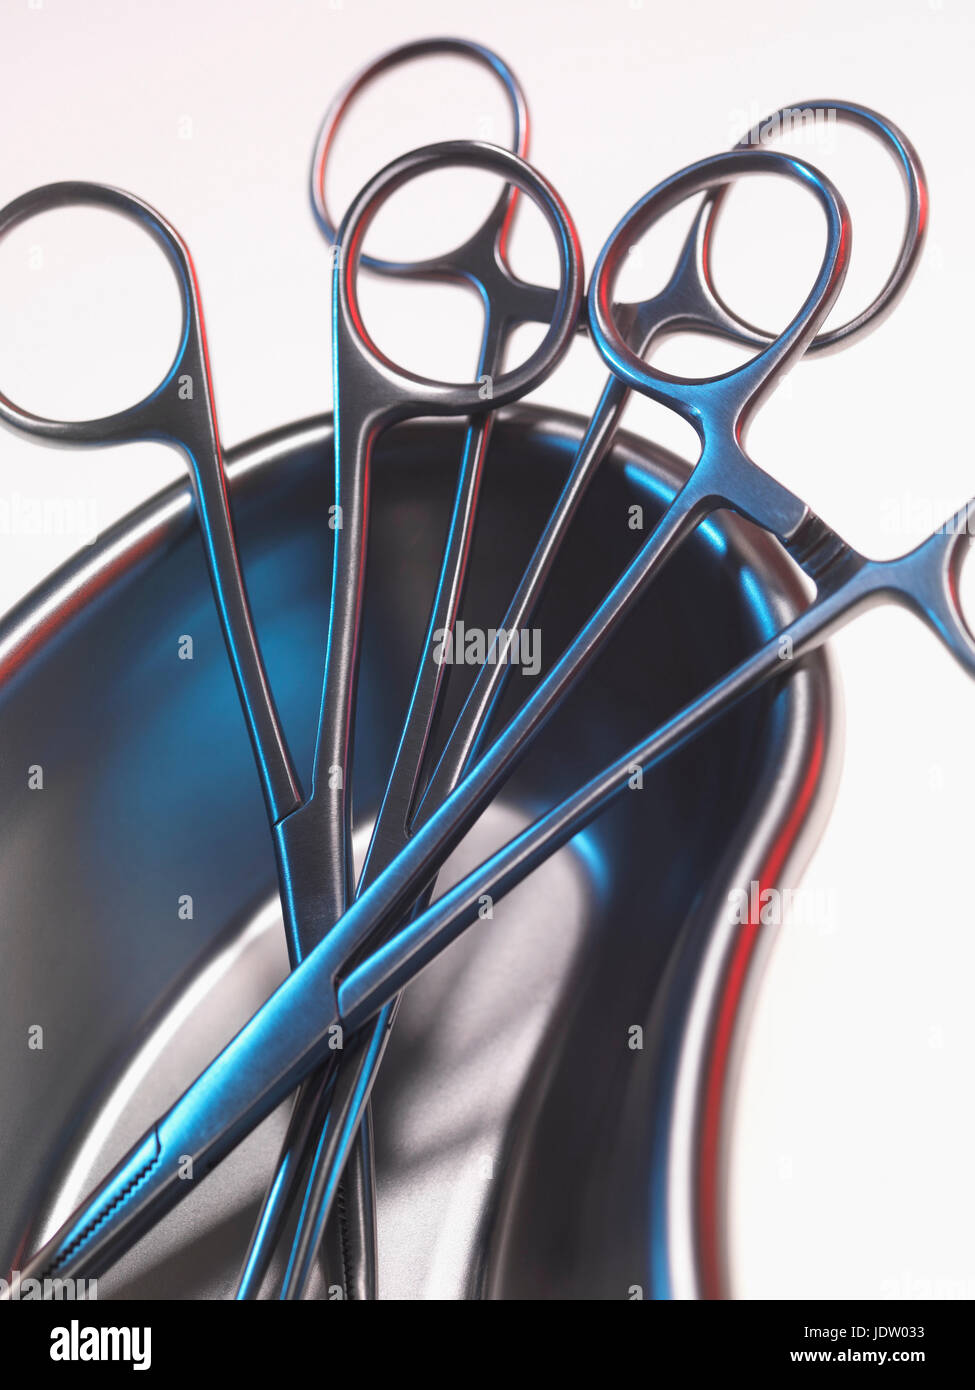 Close up of scissor forceps in bowl Stock Photo